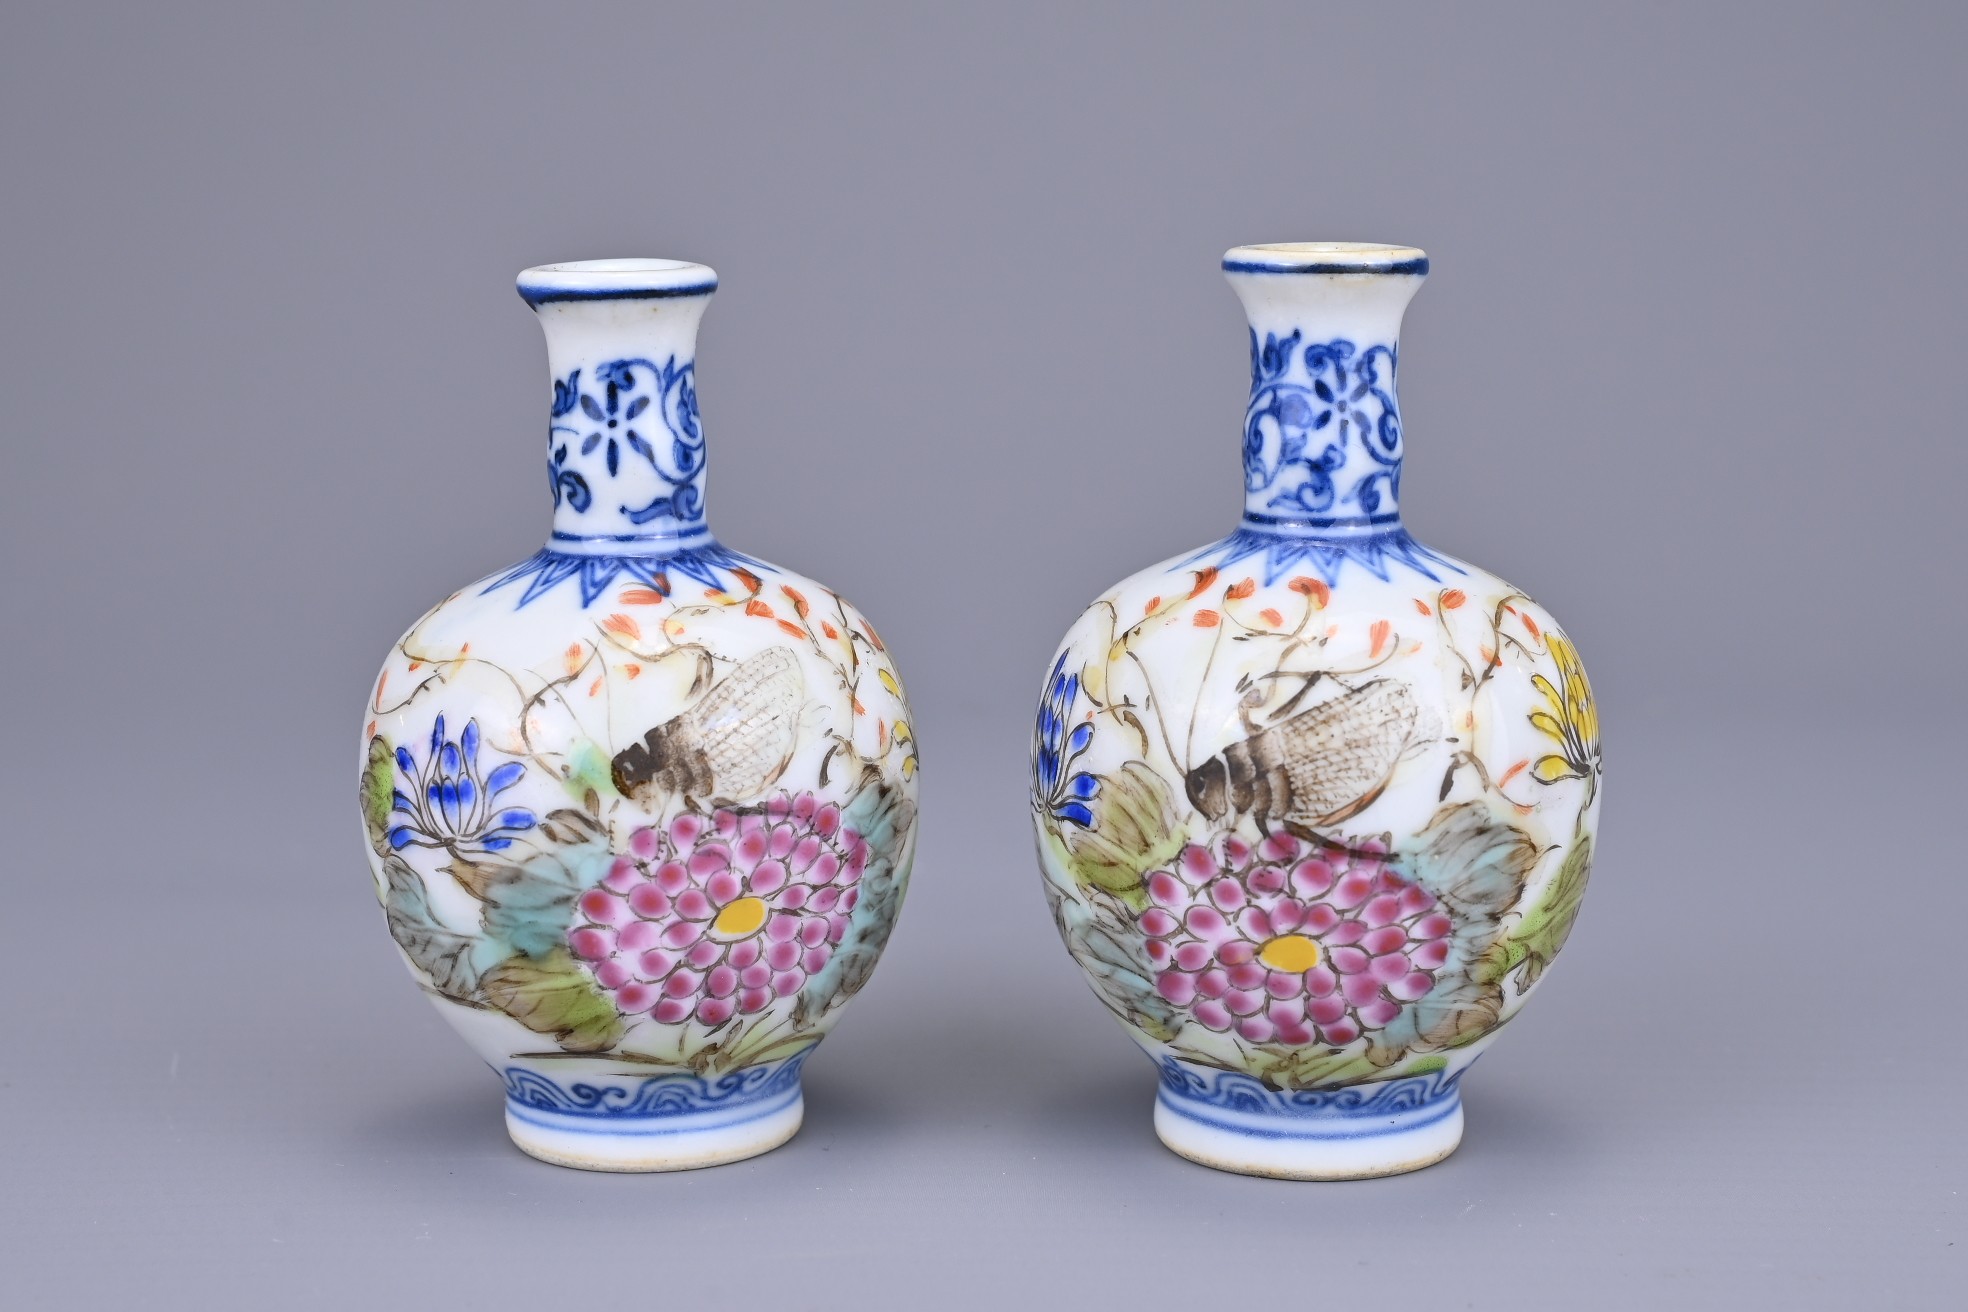 A PAIR OF CHINESE MINIATURE PORCELAIN VASES, REPUBLIC PERIOD. Each decorated in underglaze blue